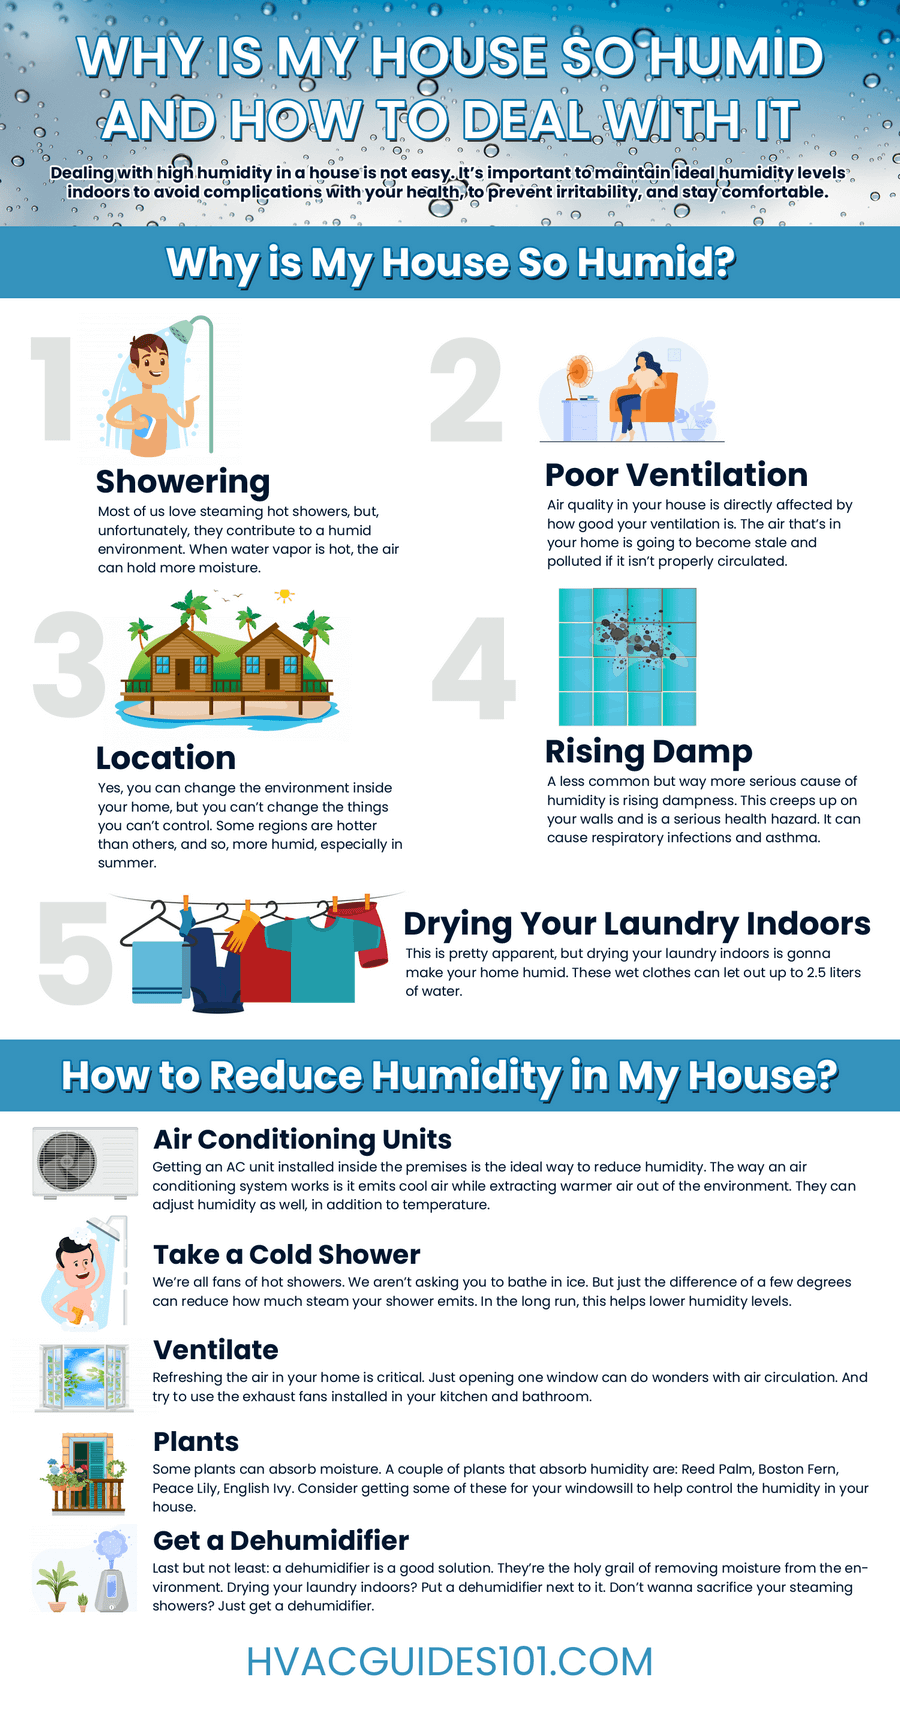 Why Is My House So Humid (and How to Deal With It)